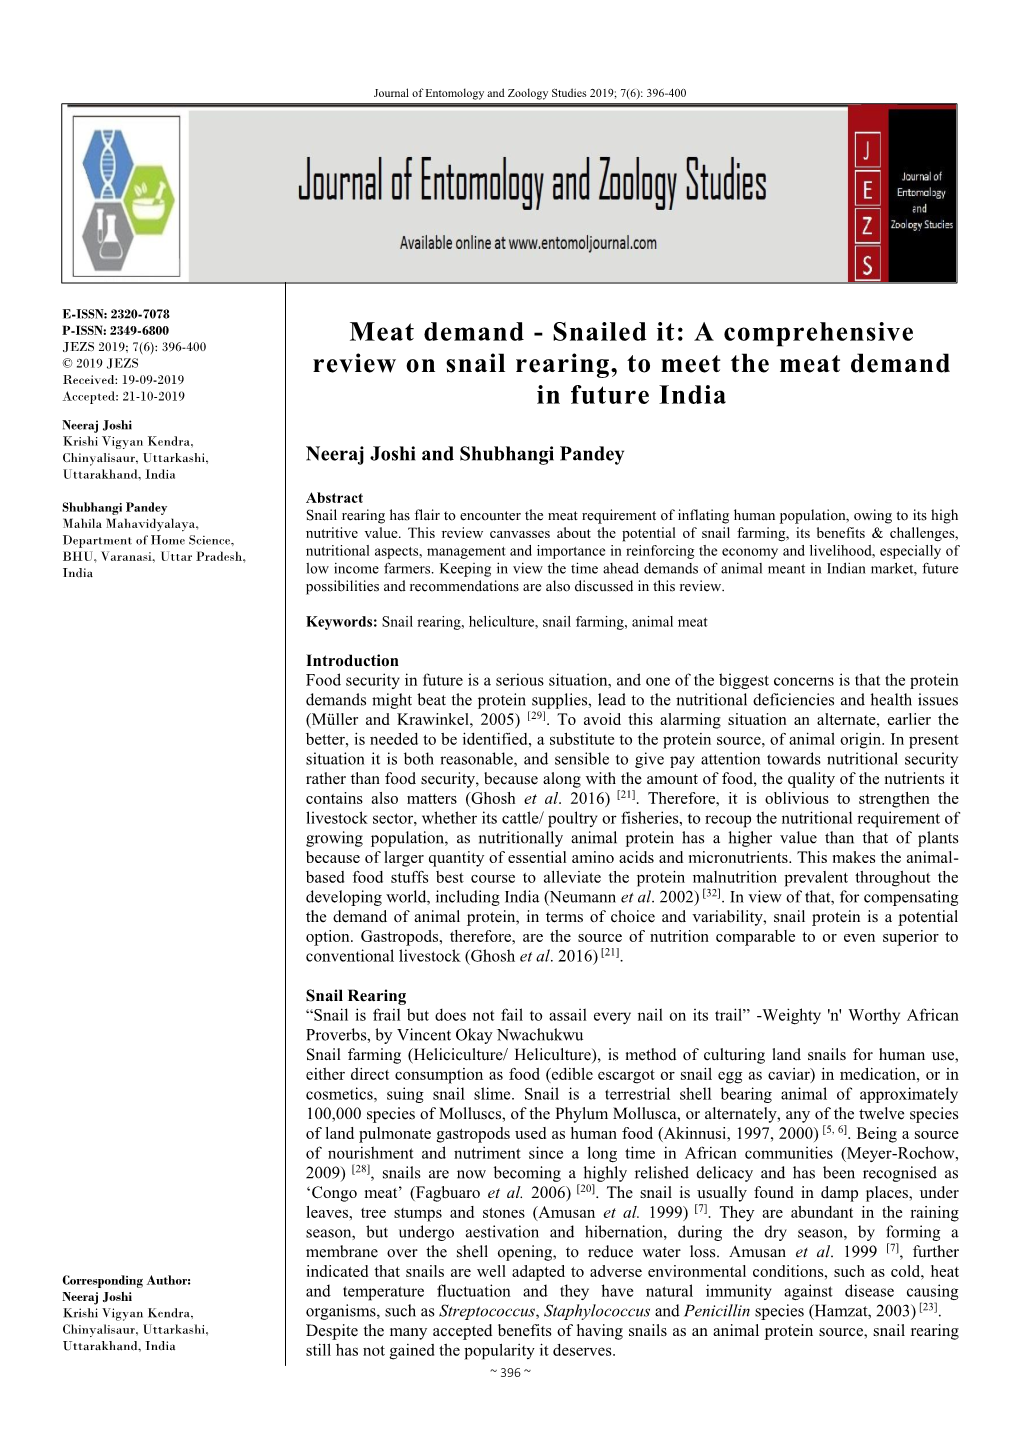 A Comprehensive Review on Snail Rearing, to Meet the Meat Demand